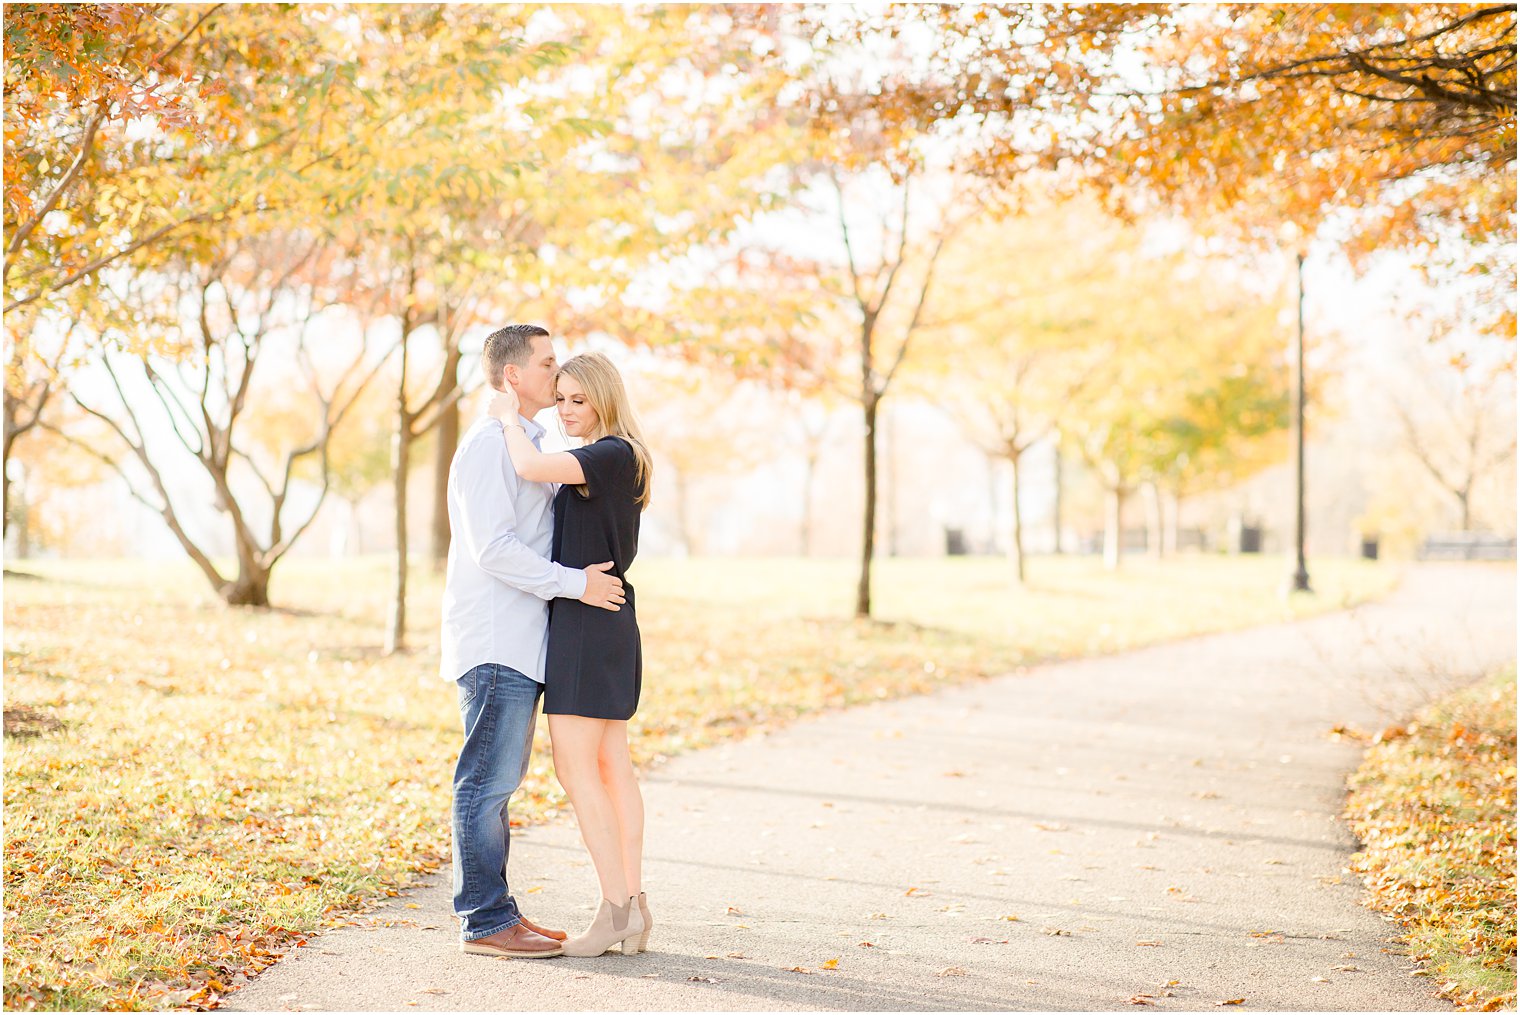 Romantic photo during Liberty State Park Engagement Session